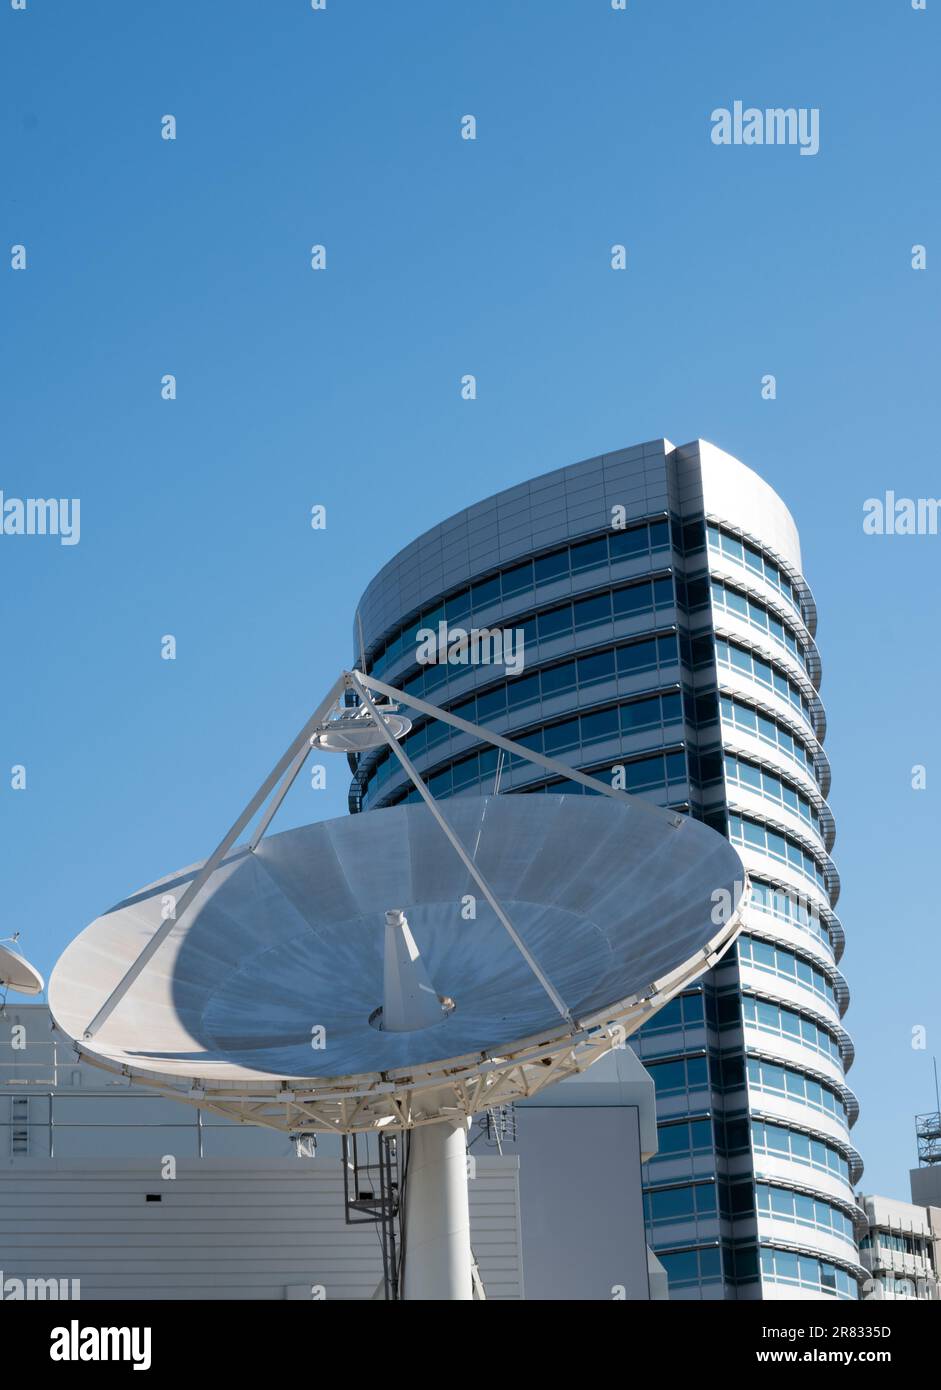 A satellite receiver dish sits atop a smaller building in the foreground. The high-rise building in the background offers a confusing sense of scale i Stock Photo